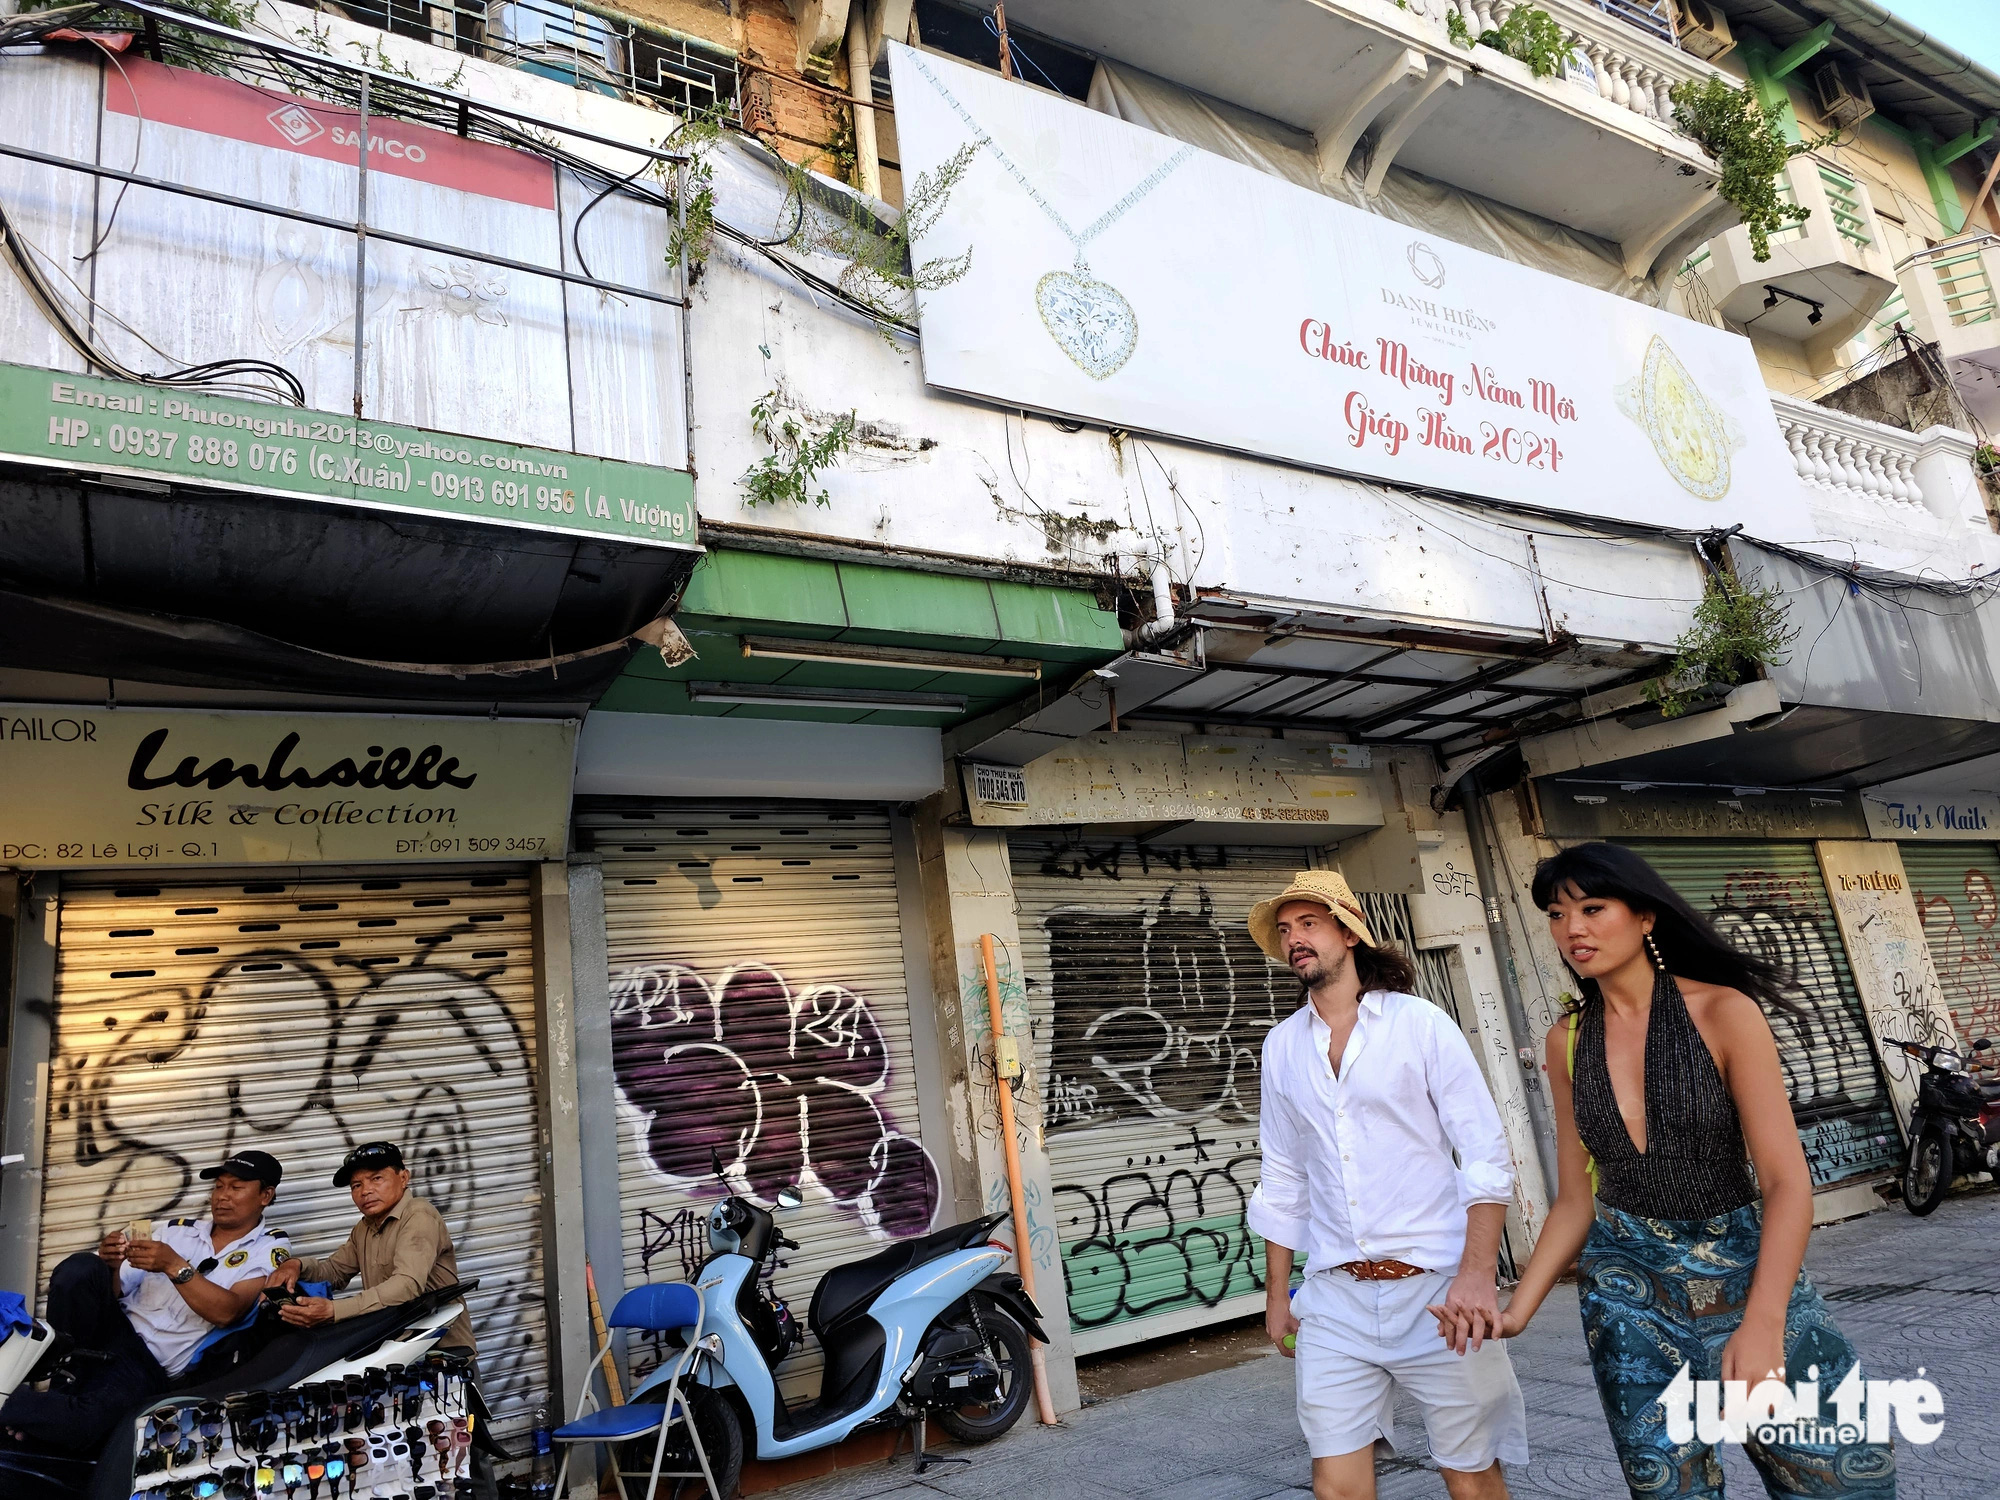 Stores lining Le Loi Boulevard in District 1, Ho Chi Minh City become canvases for graffiti after remaining unoccupied for many years. Photo: Ngoc Hien / Tuoi Tre